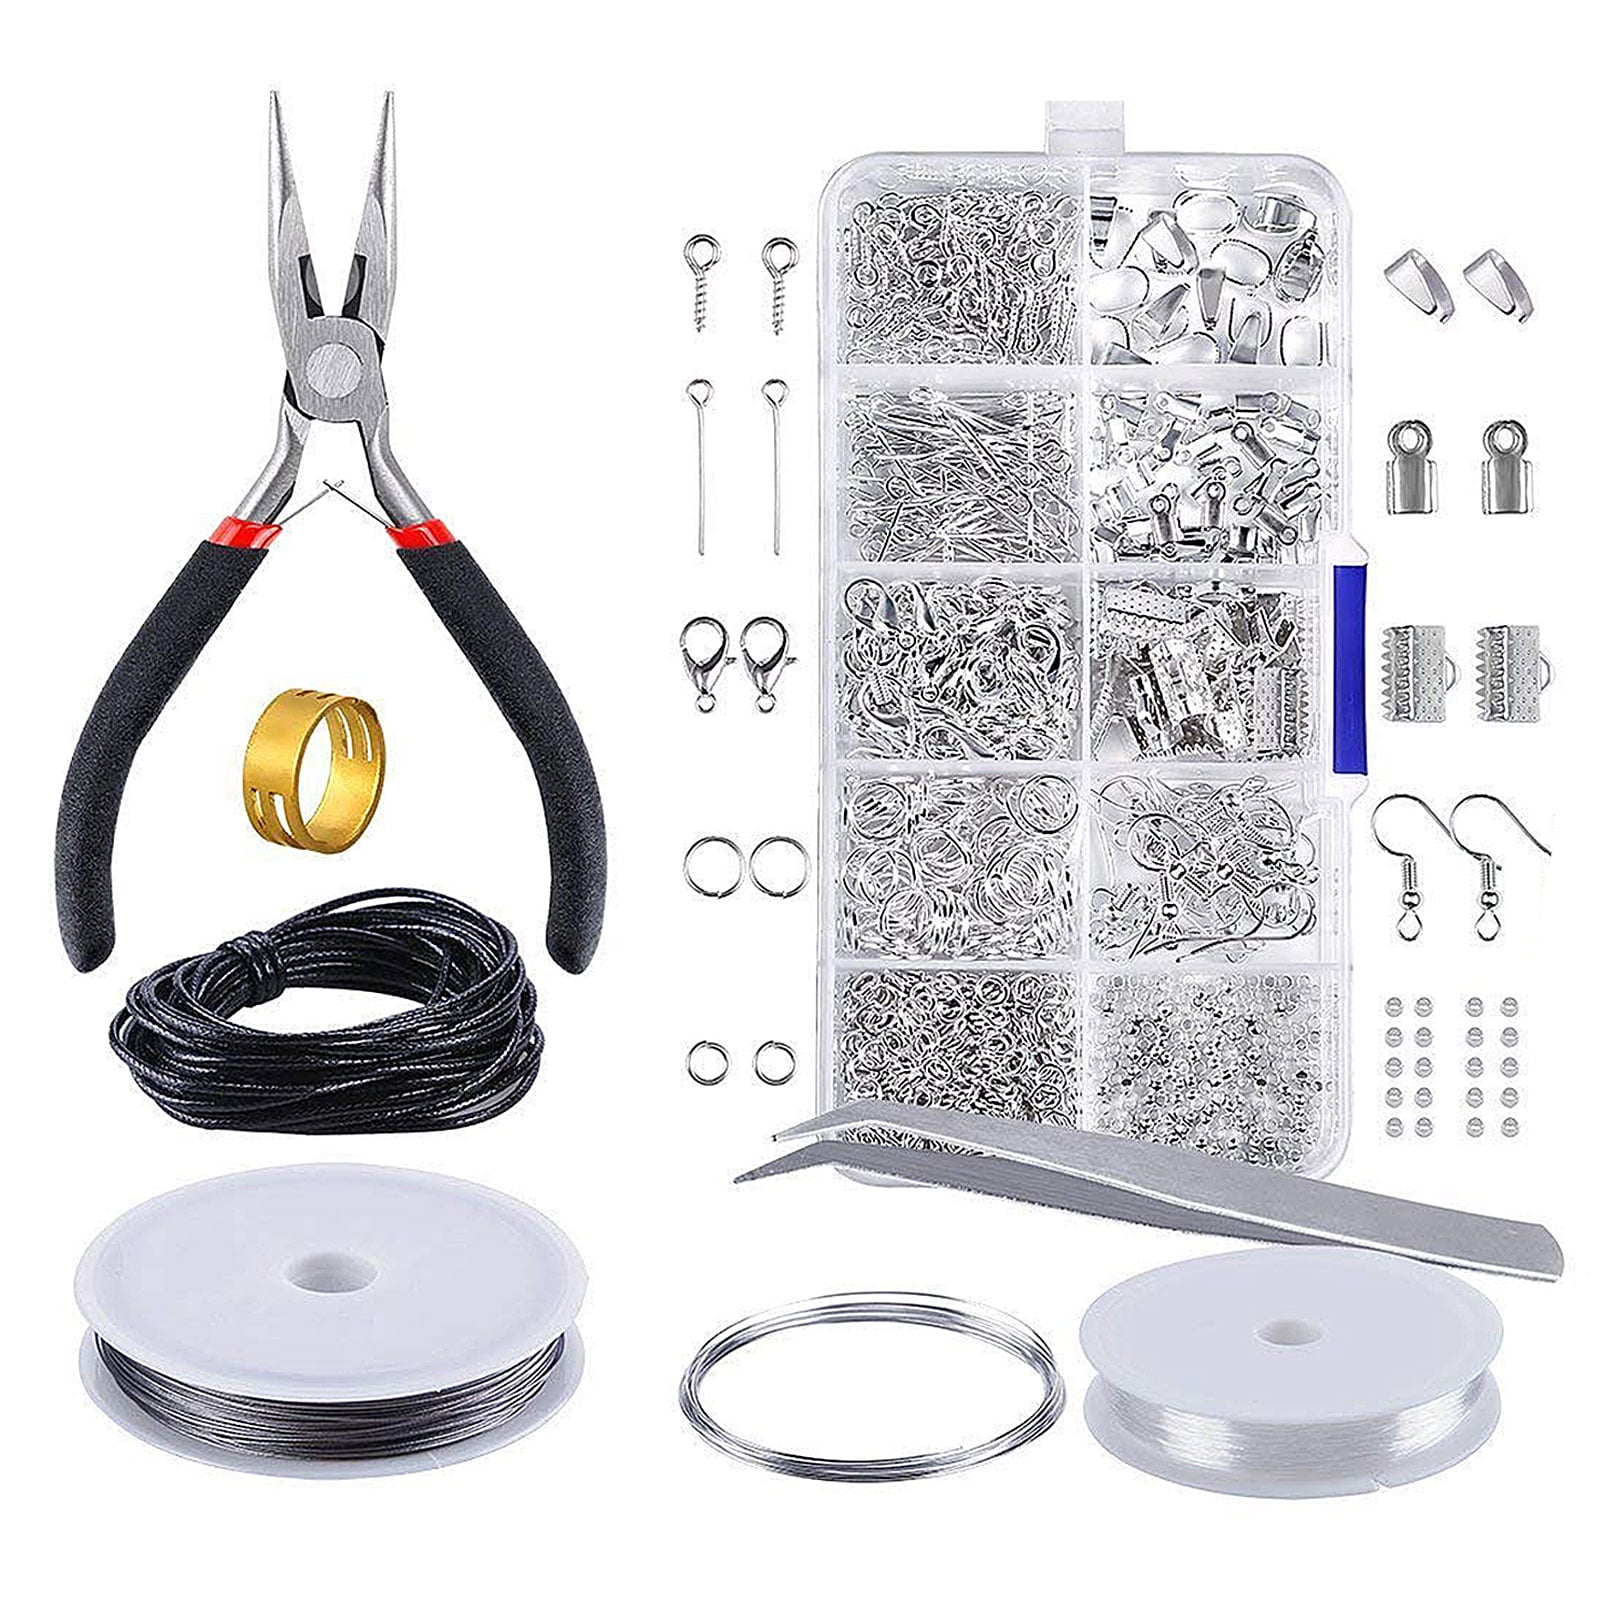 Songin Jewelry Making Kit, Jewelry Making Repair Suppies Tools for Adults, Wire Wrapping Kit with Pliers for Jewelry Bracket